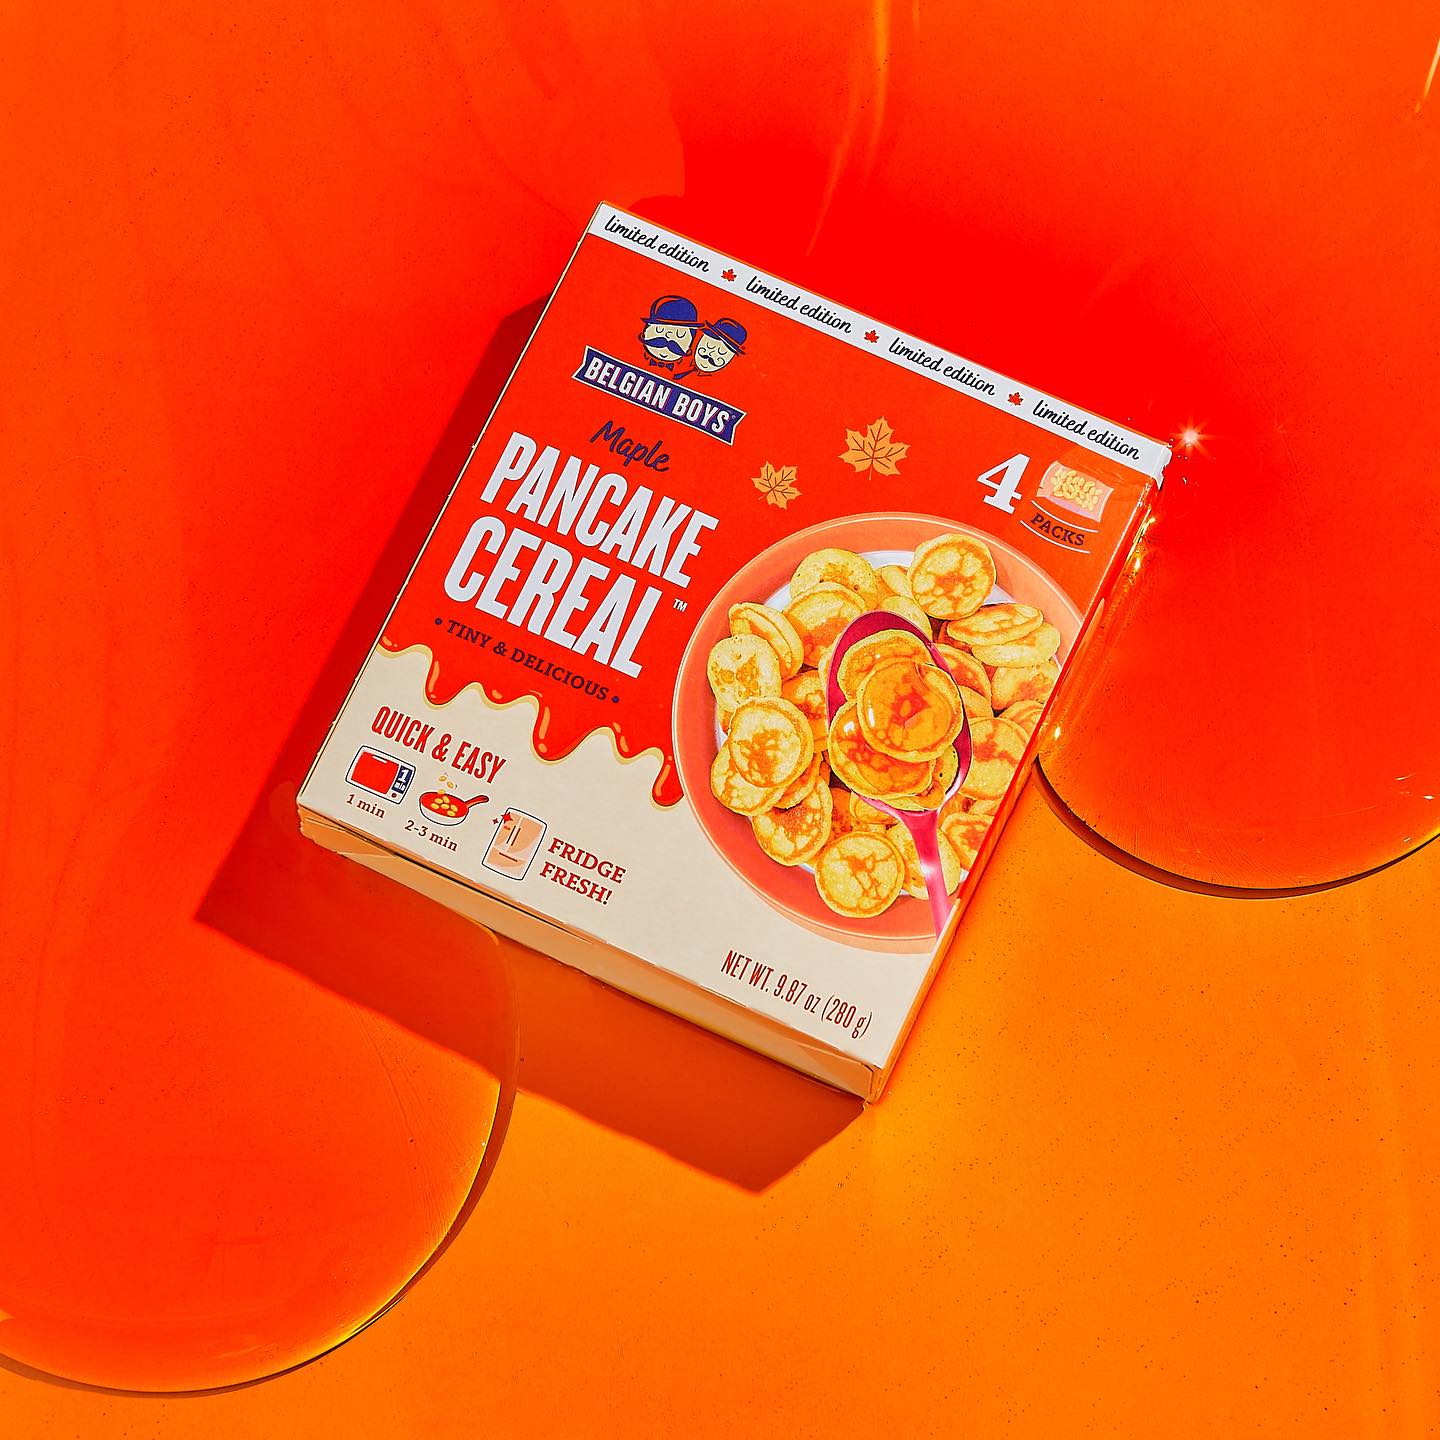 Belgian Boys Says ‘F*ck Pumpkin Spice Season, We’re Going Maple’ With Return of Pancake Cereal